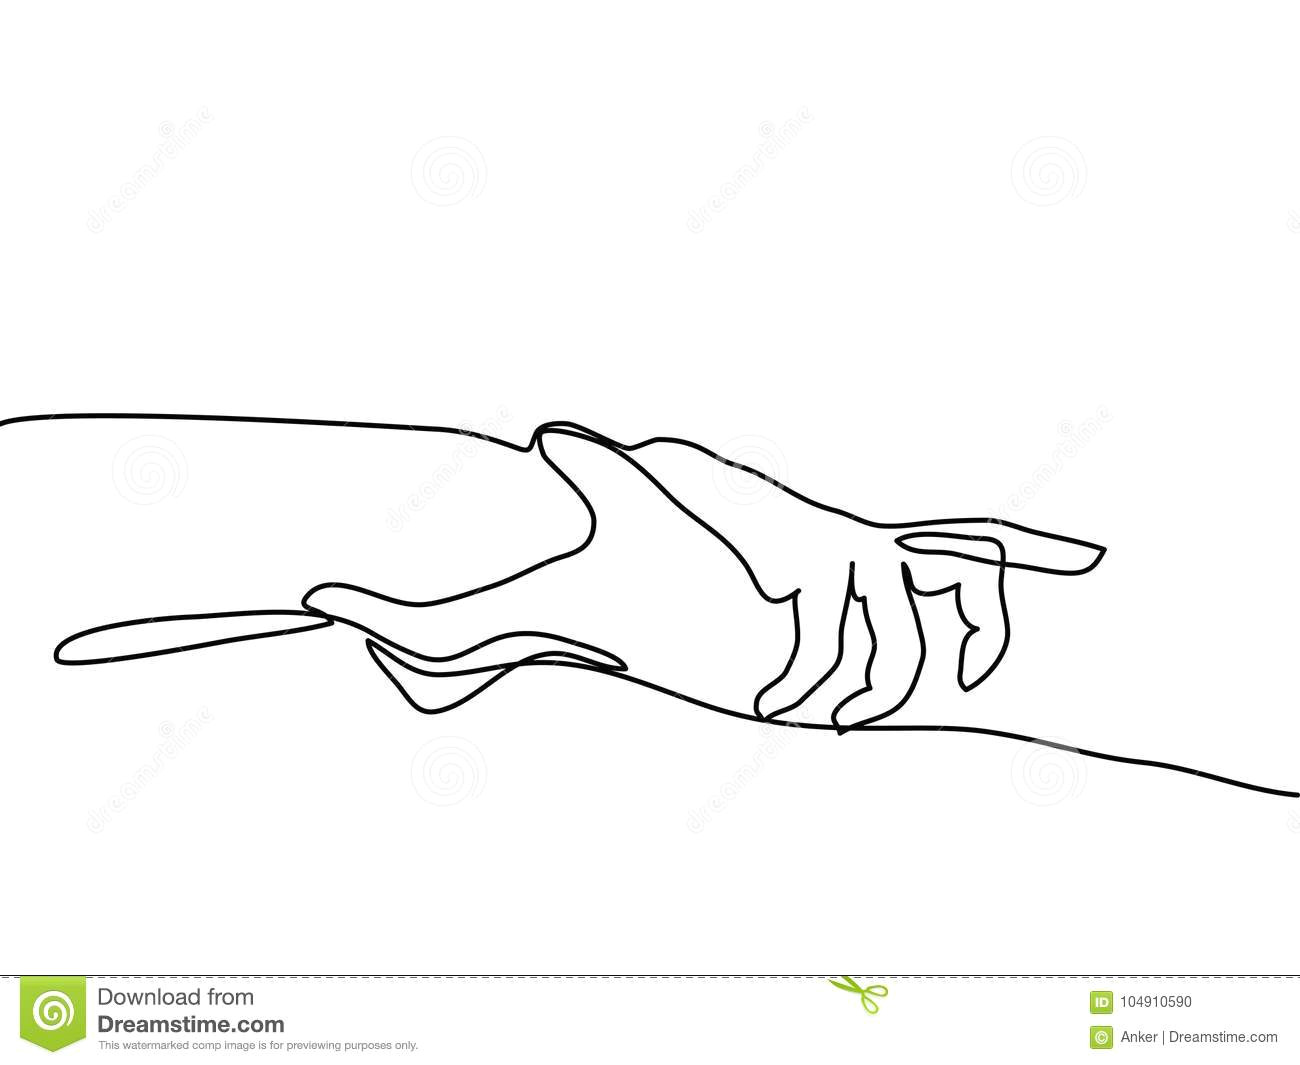 Drawings Of Holding Hands together Continuous Line Drawing Of Holding Hands together Stock Vector